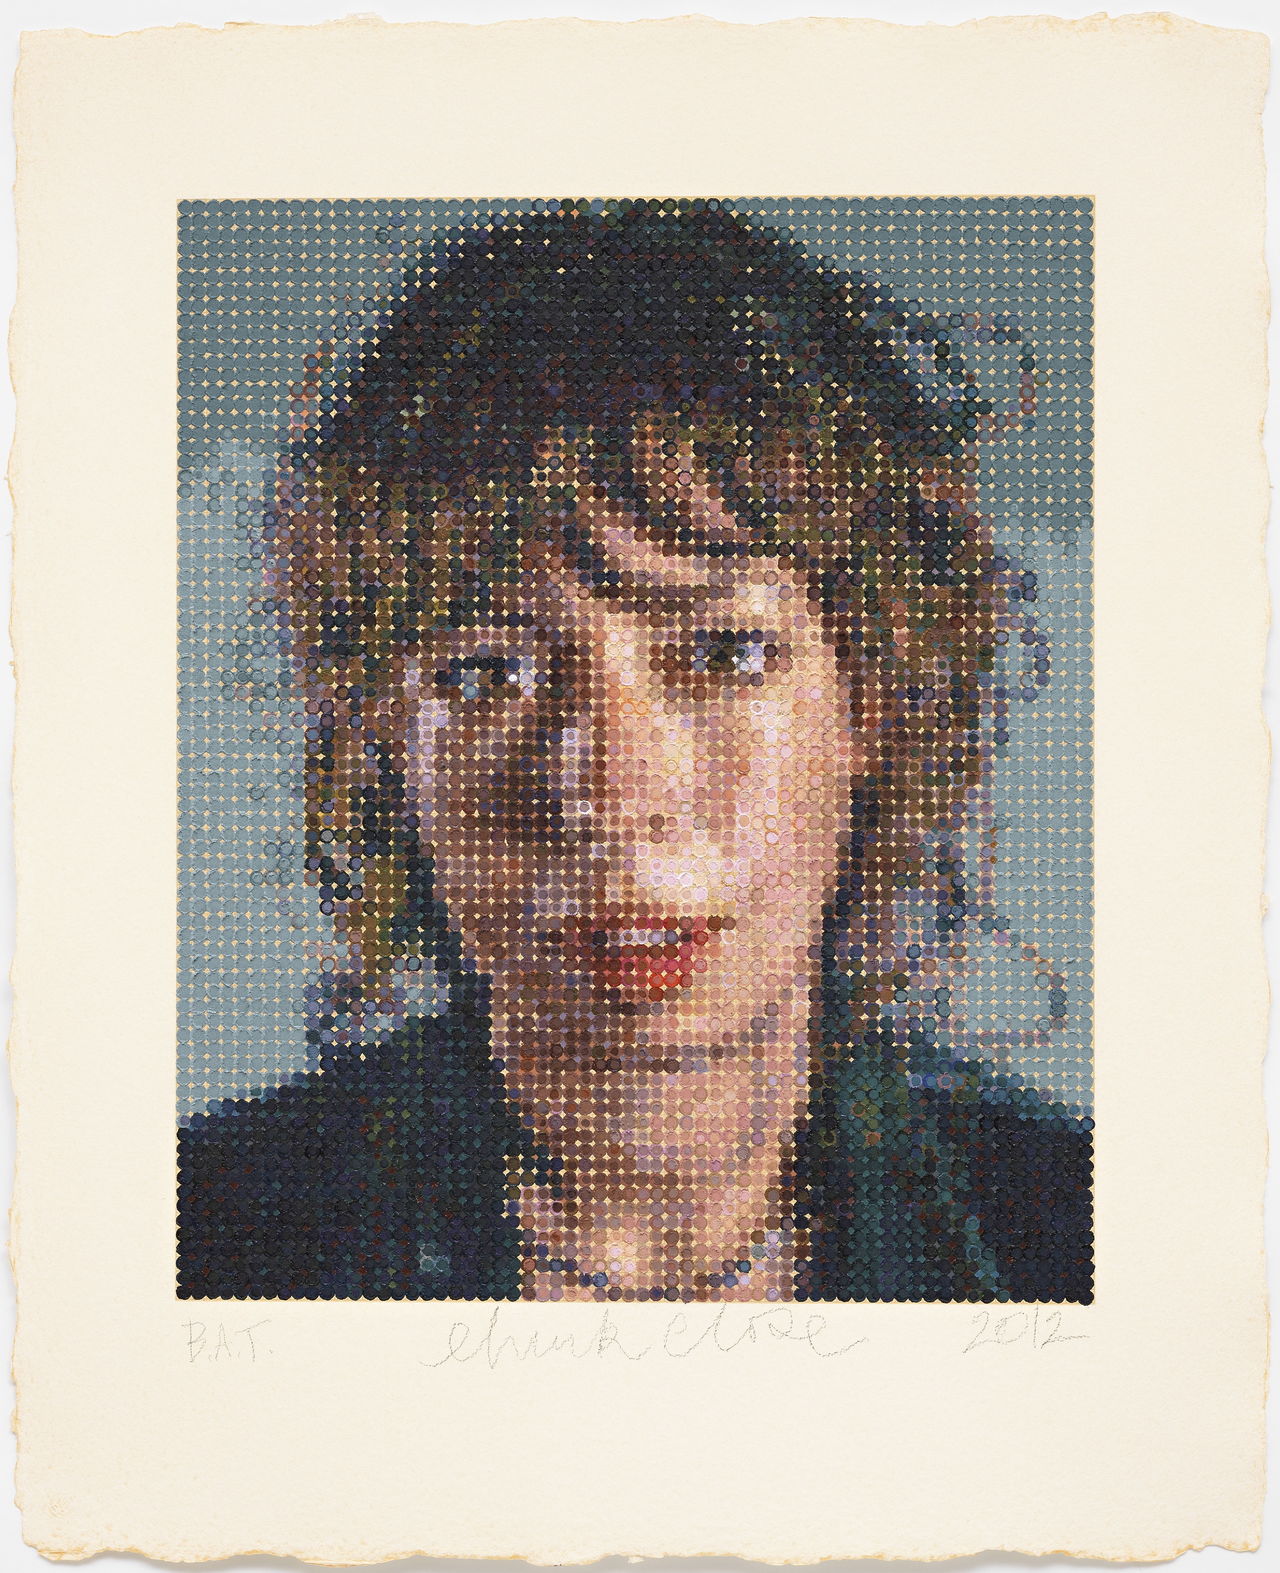 “Cecily” by Chuck Close, whose homecoming show opens May 12 at the Schack Art Center in Everett.